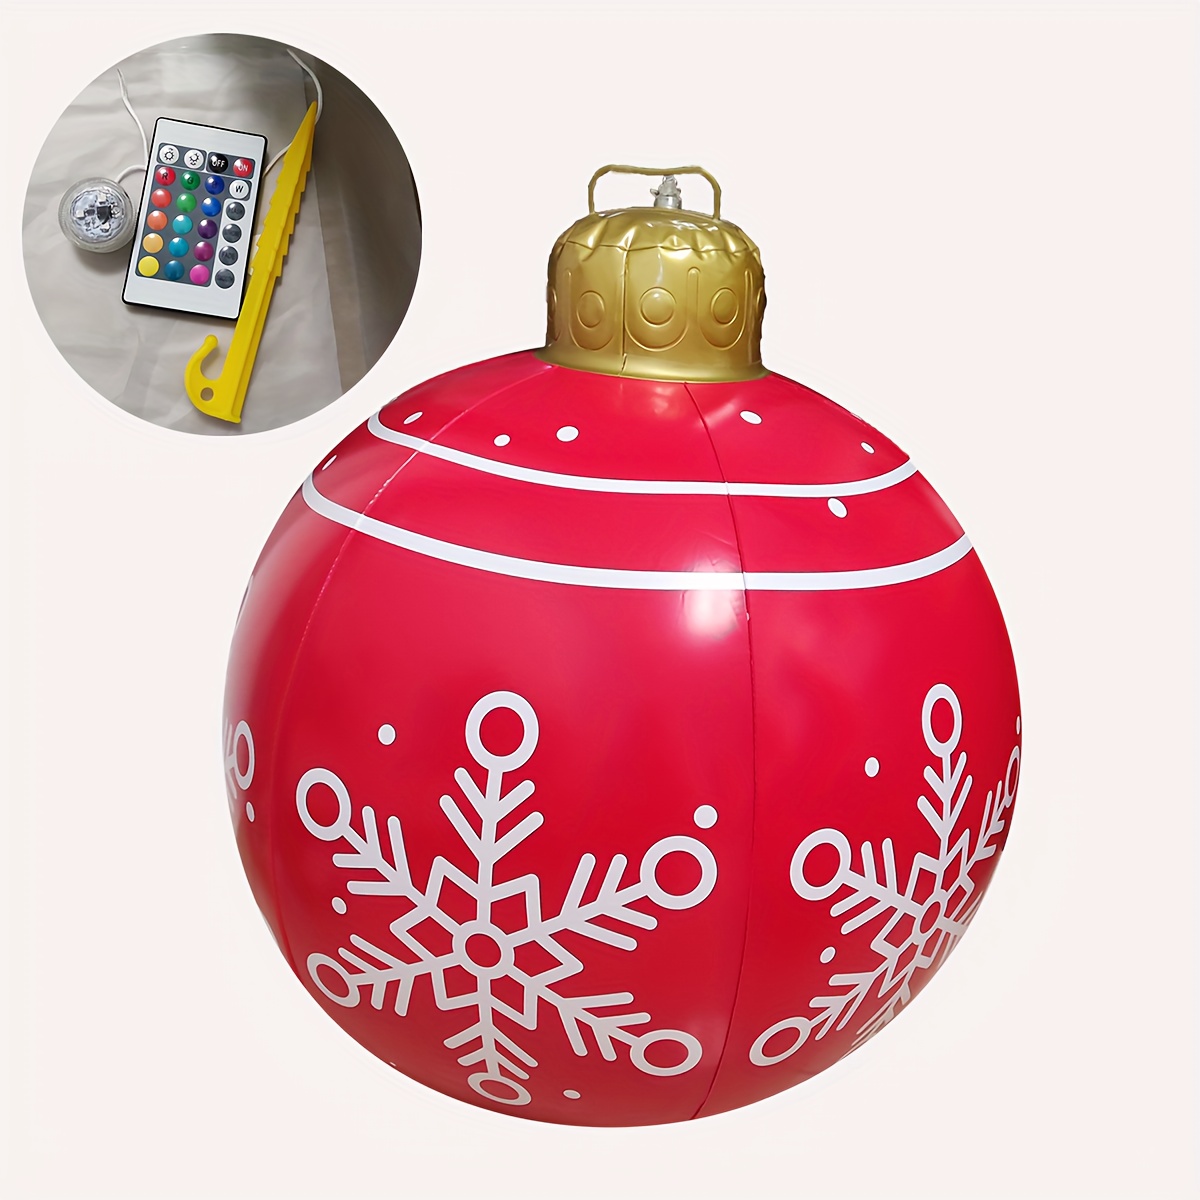 Snowflake Punch Ball Toys - Awesome Holiday Prize!